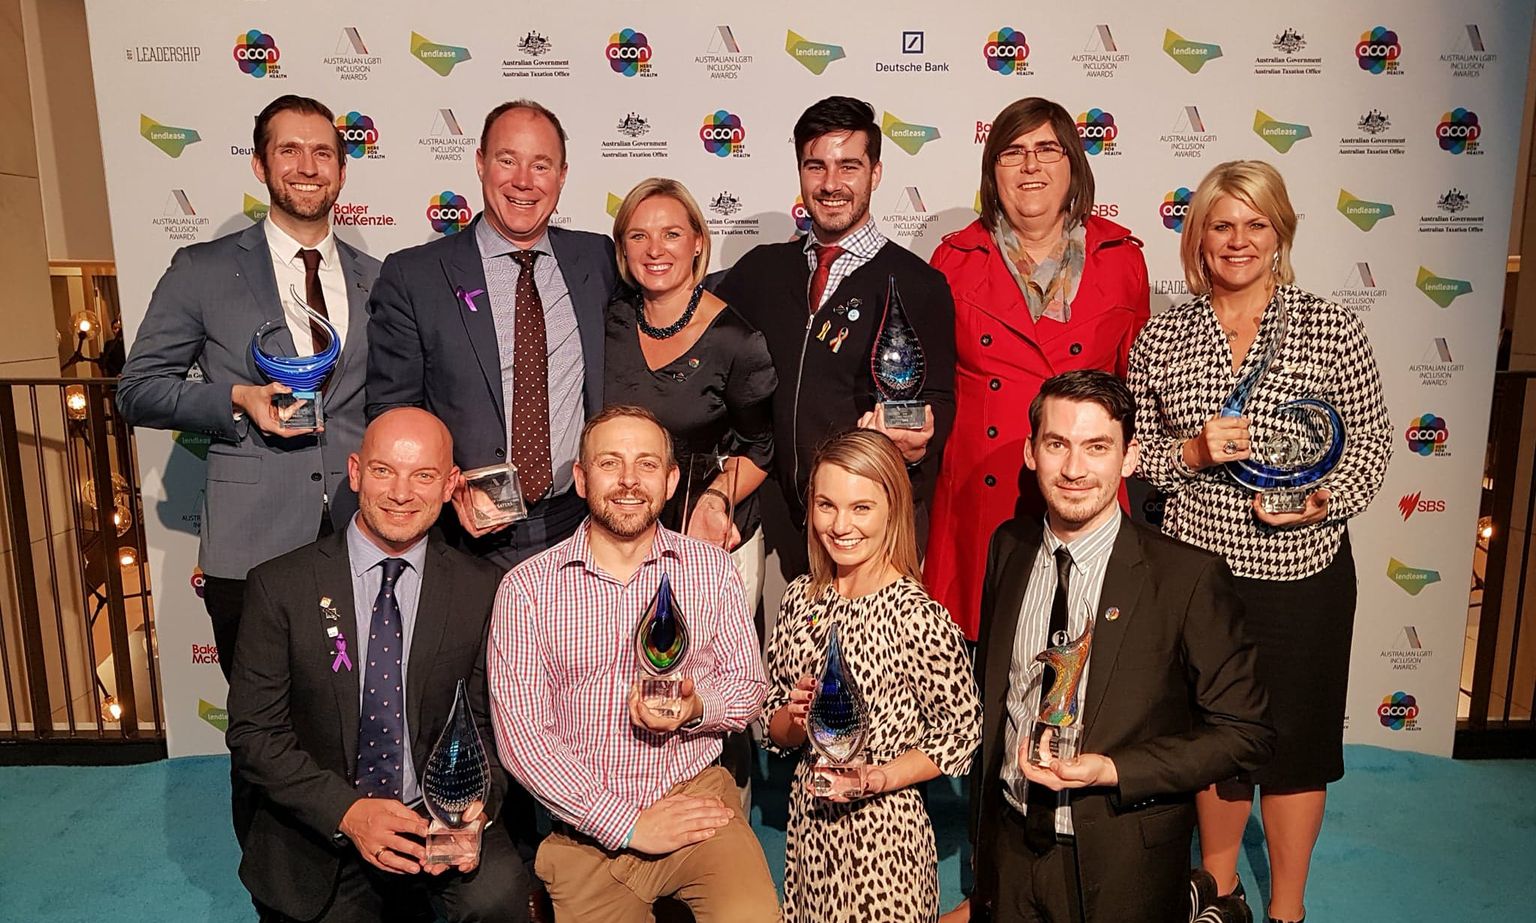 Commonwealth Bank and Westpac among big winners at this year’s LGBTI inclusion awards